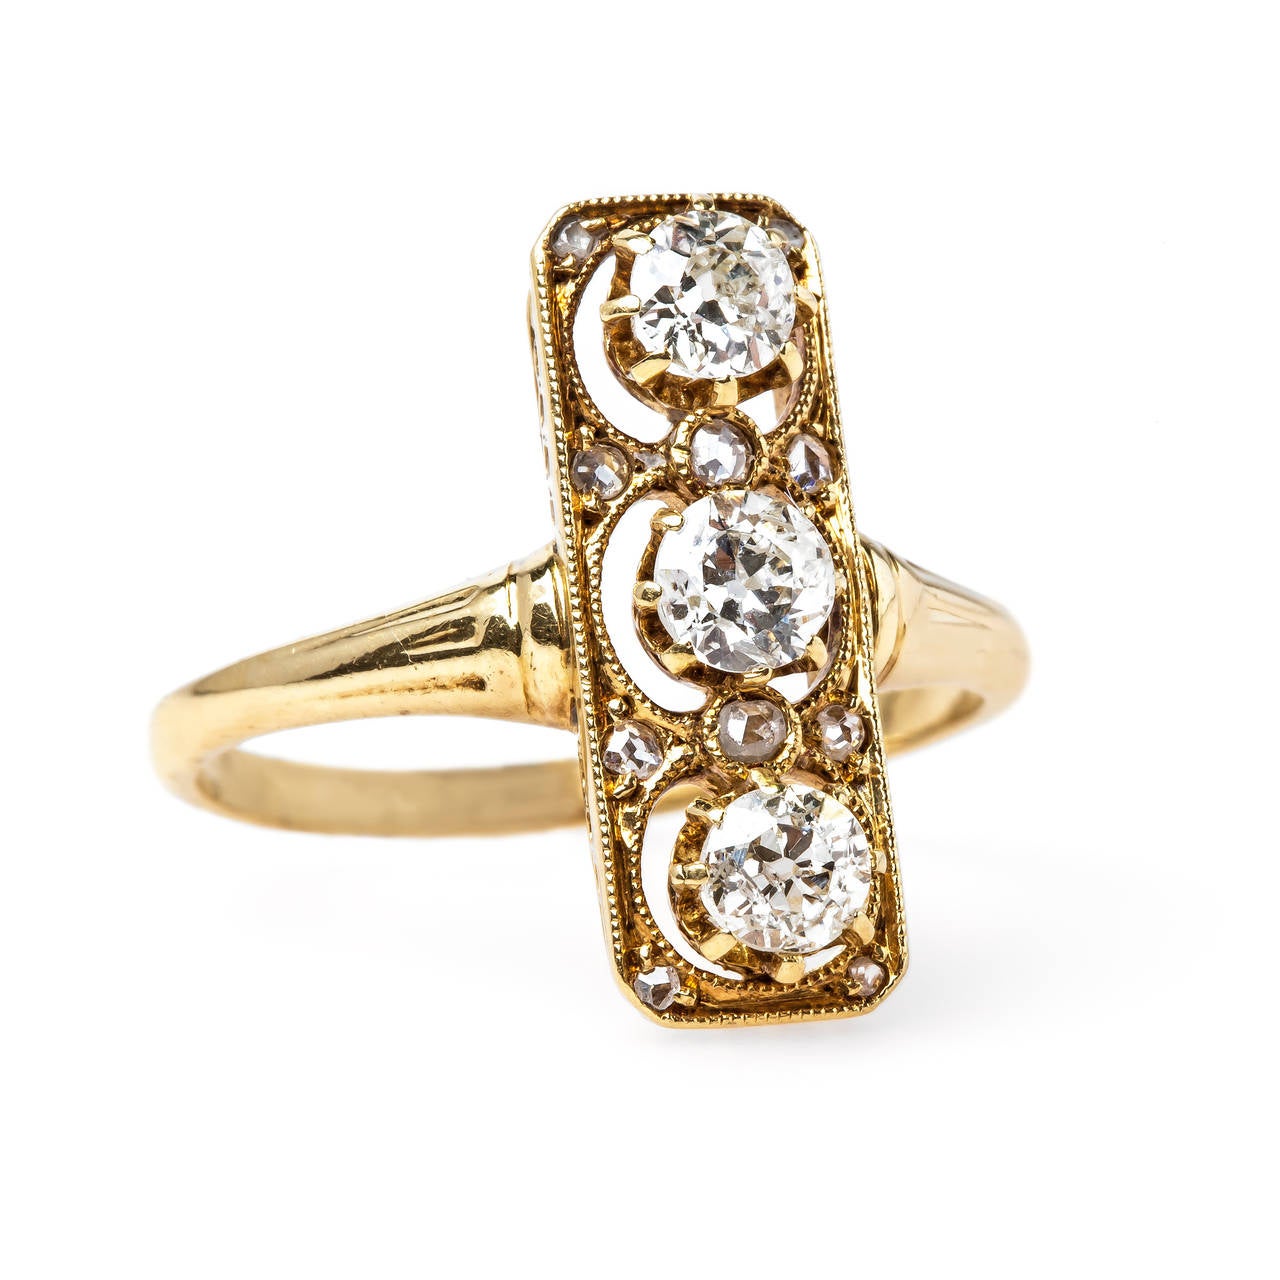 Abbey Road is a one-of-a-kind Victorian (circa 1895) 18k yellow gold ring centering three Old Mine Cut diamonds set vertically in a unique rectangular setting totaling approximately 0.60ct. The ring is further designed with ten Rose Cut diamonds